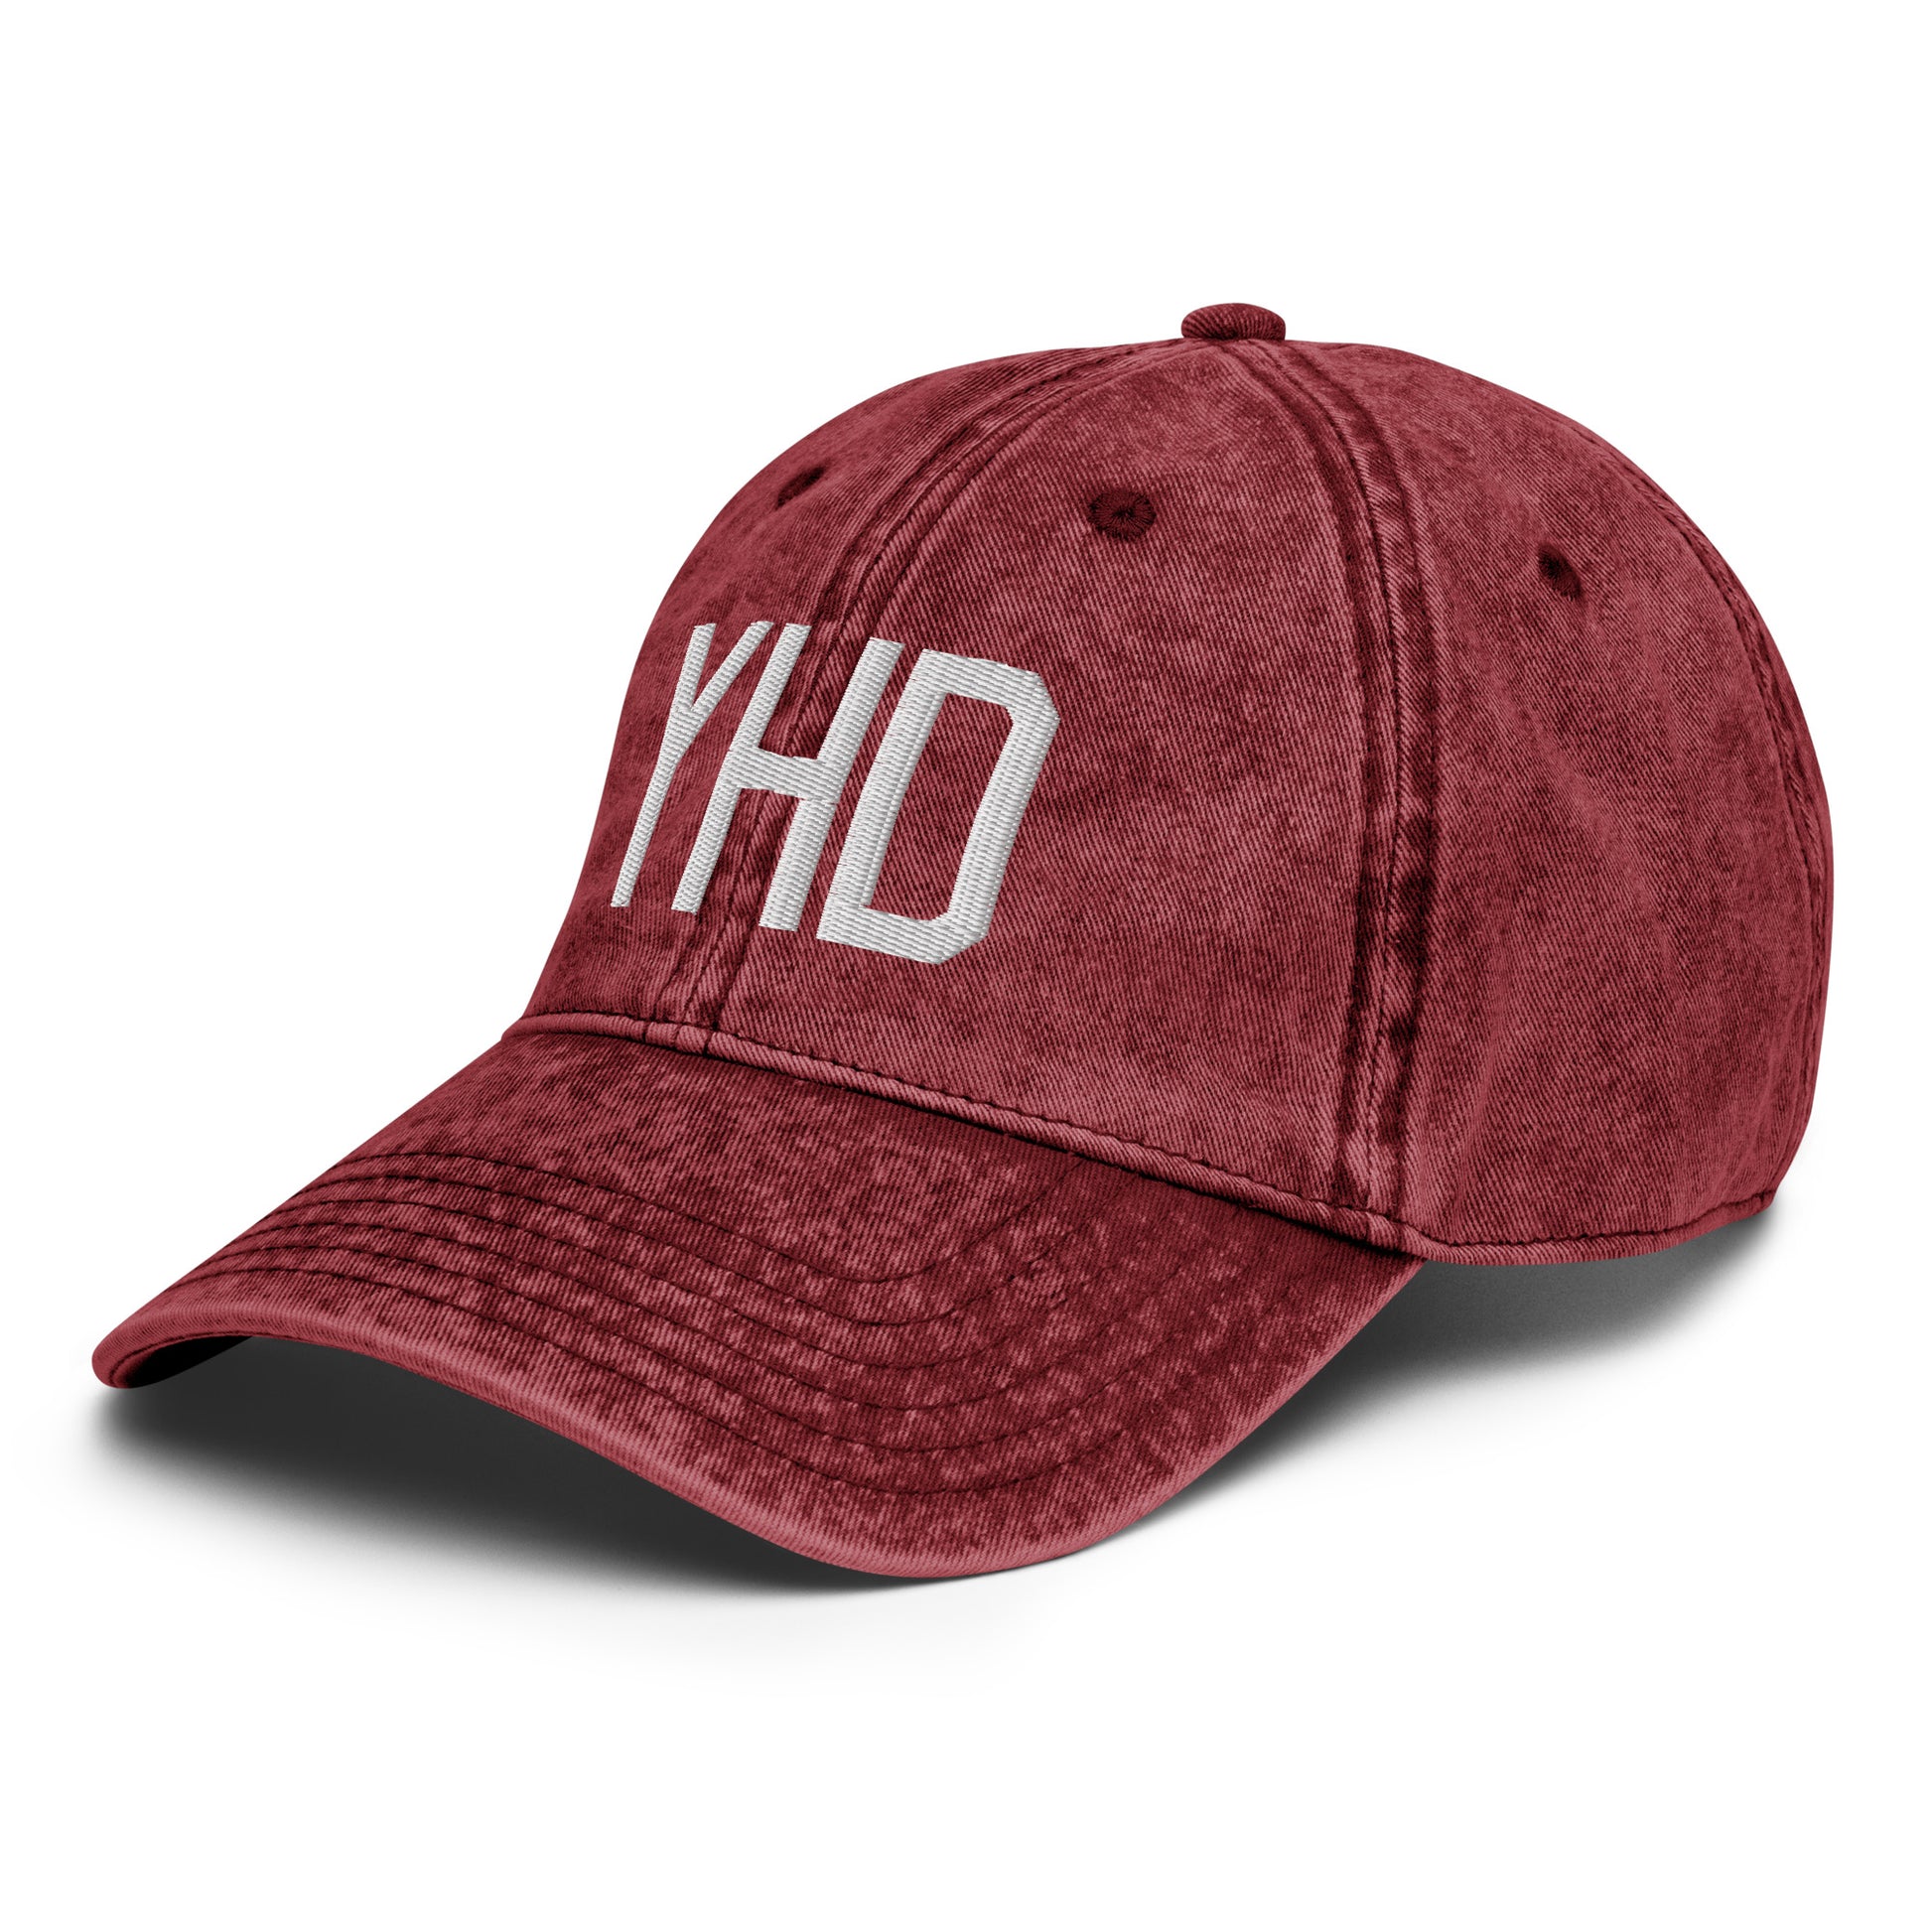 Airport Code Twill Cap - White • YHD Dryden • YHM Designs - Image 20